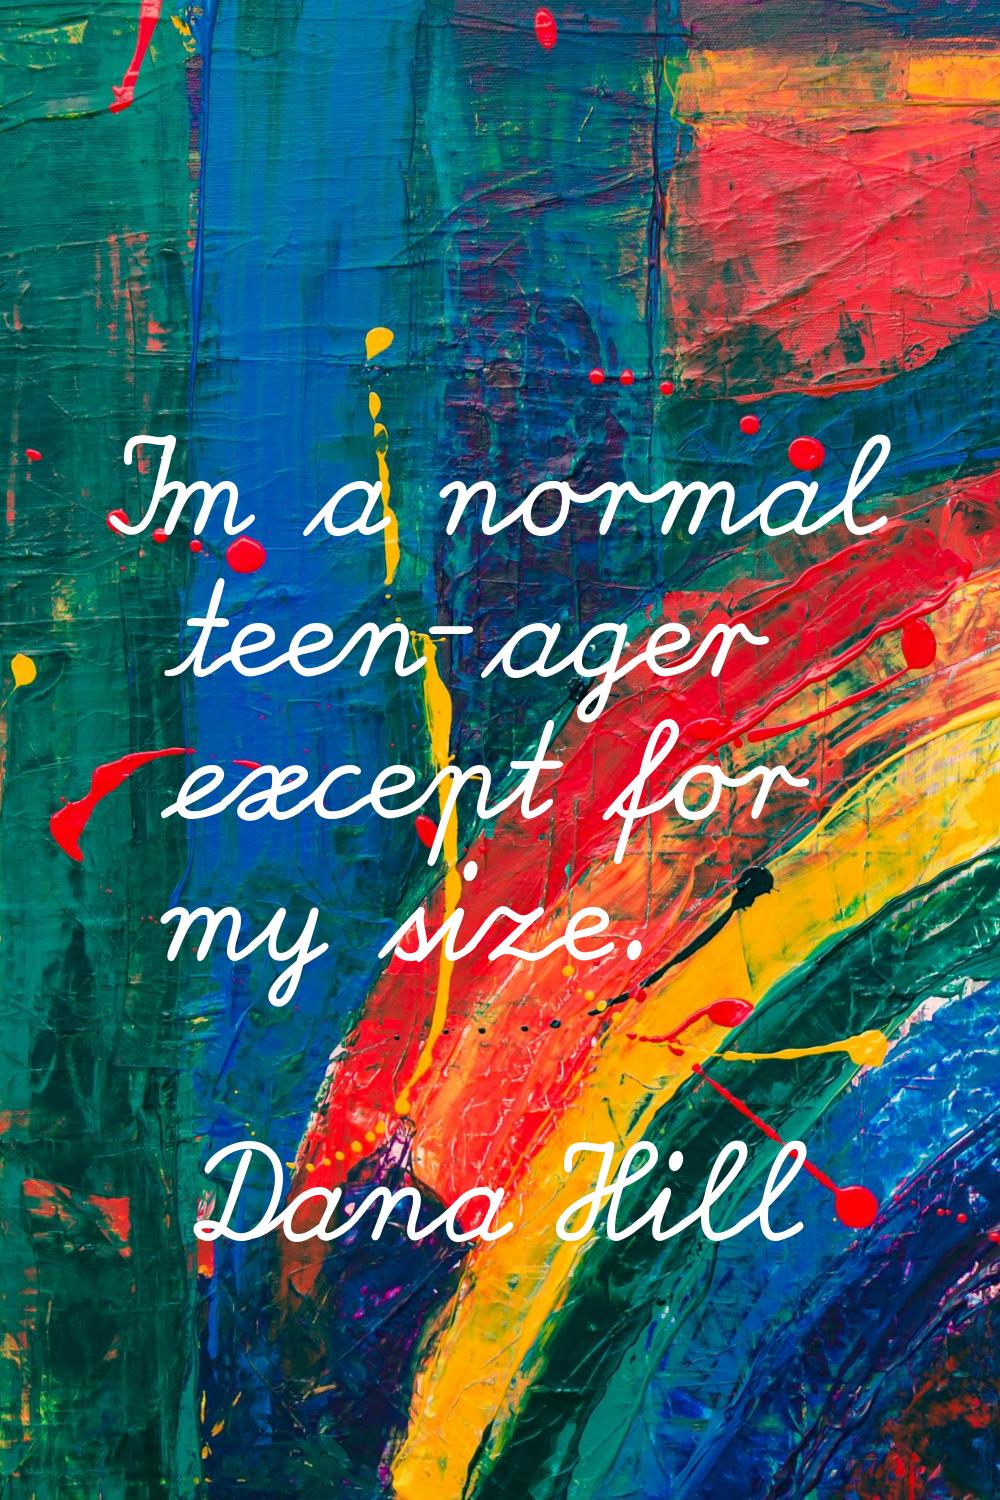 I'm a normal teen-ager except for my size.